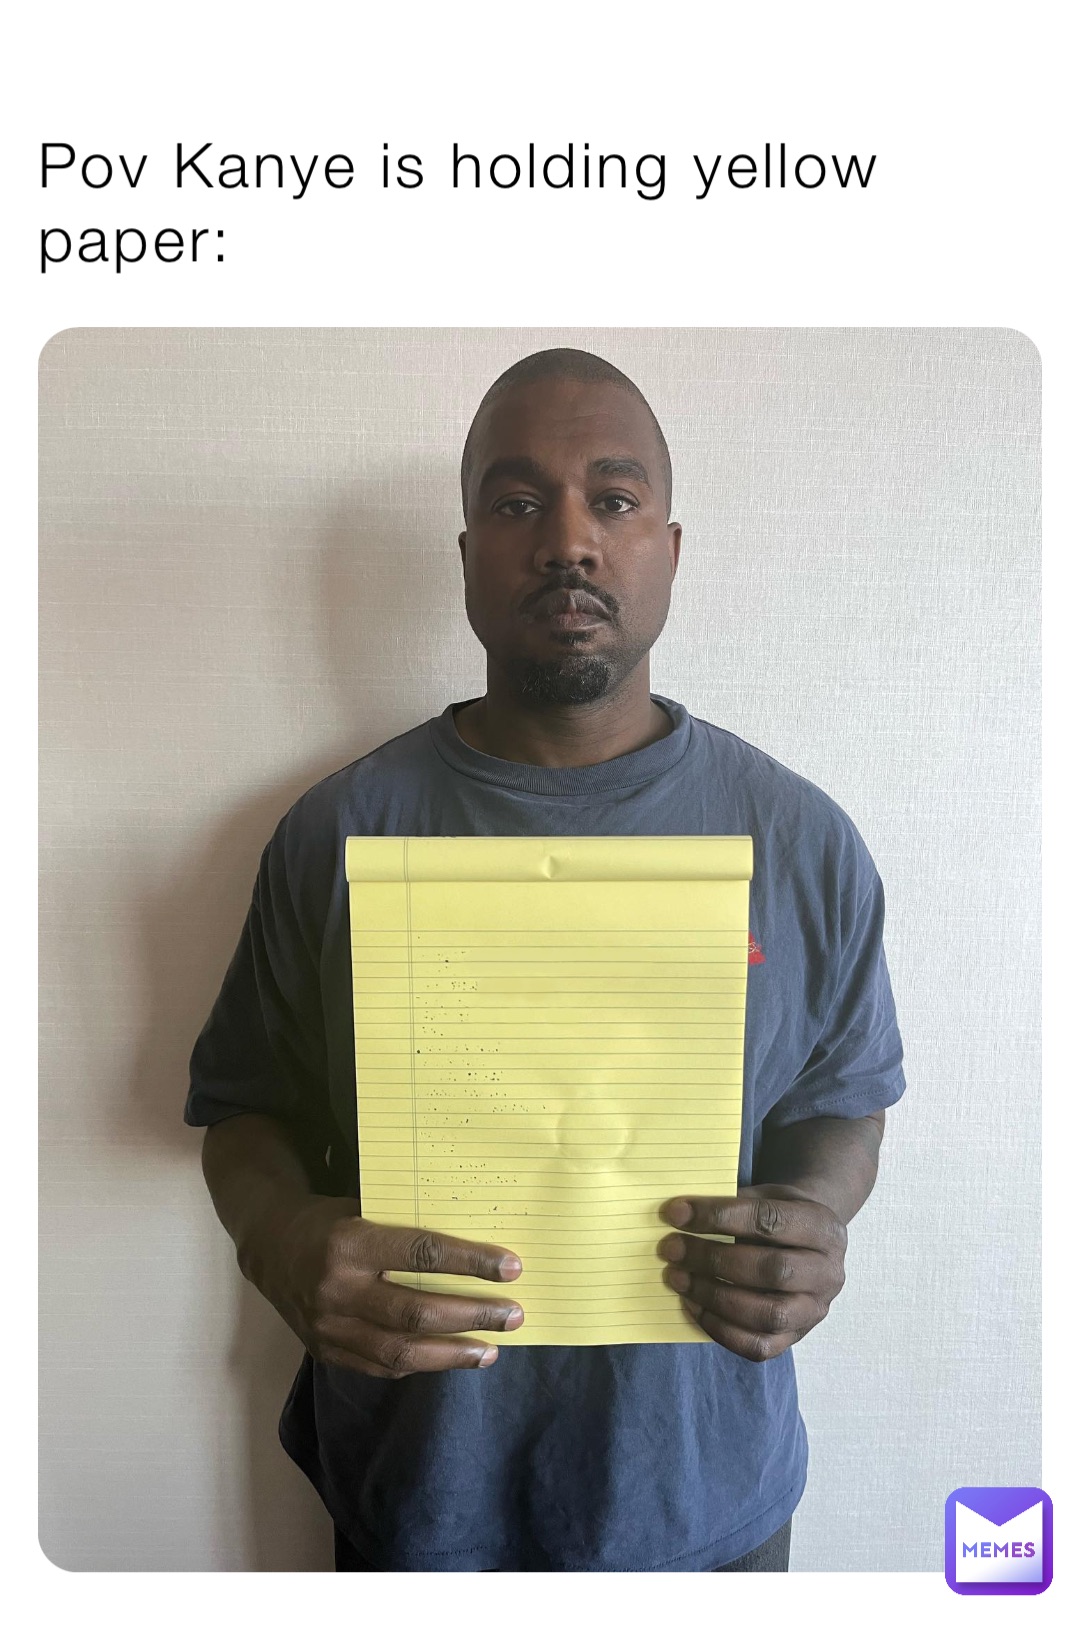 Pov Kanye is holding yellow paper: